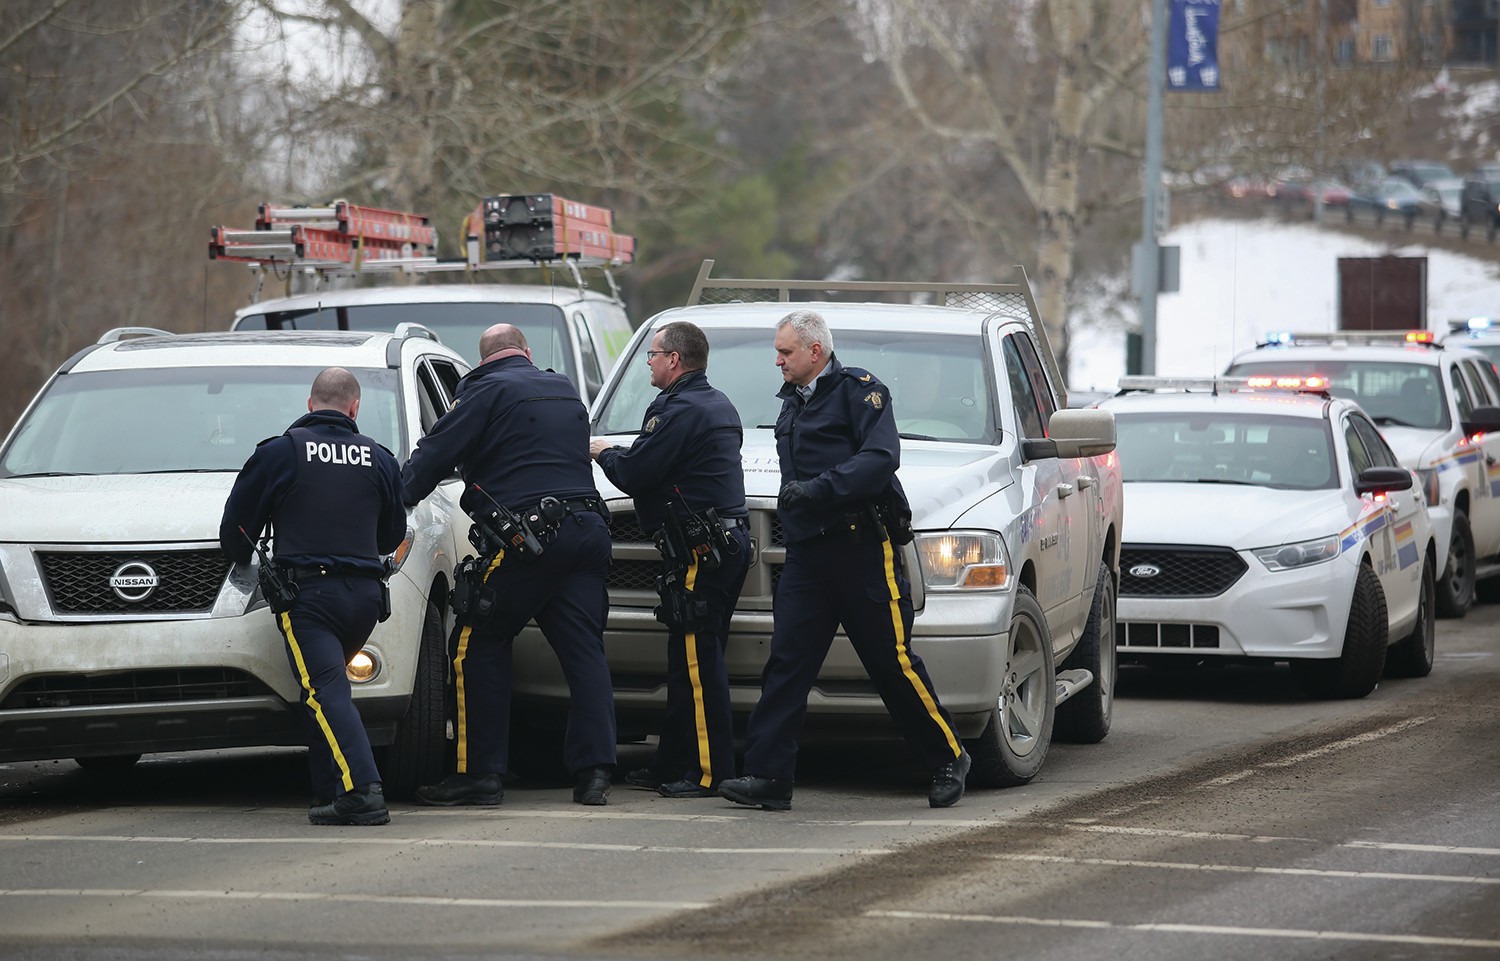 ARRESTS MADE - Police have arrested the fourth and final suspect after a hit and run in downtown Red Deer on Tuesday.